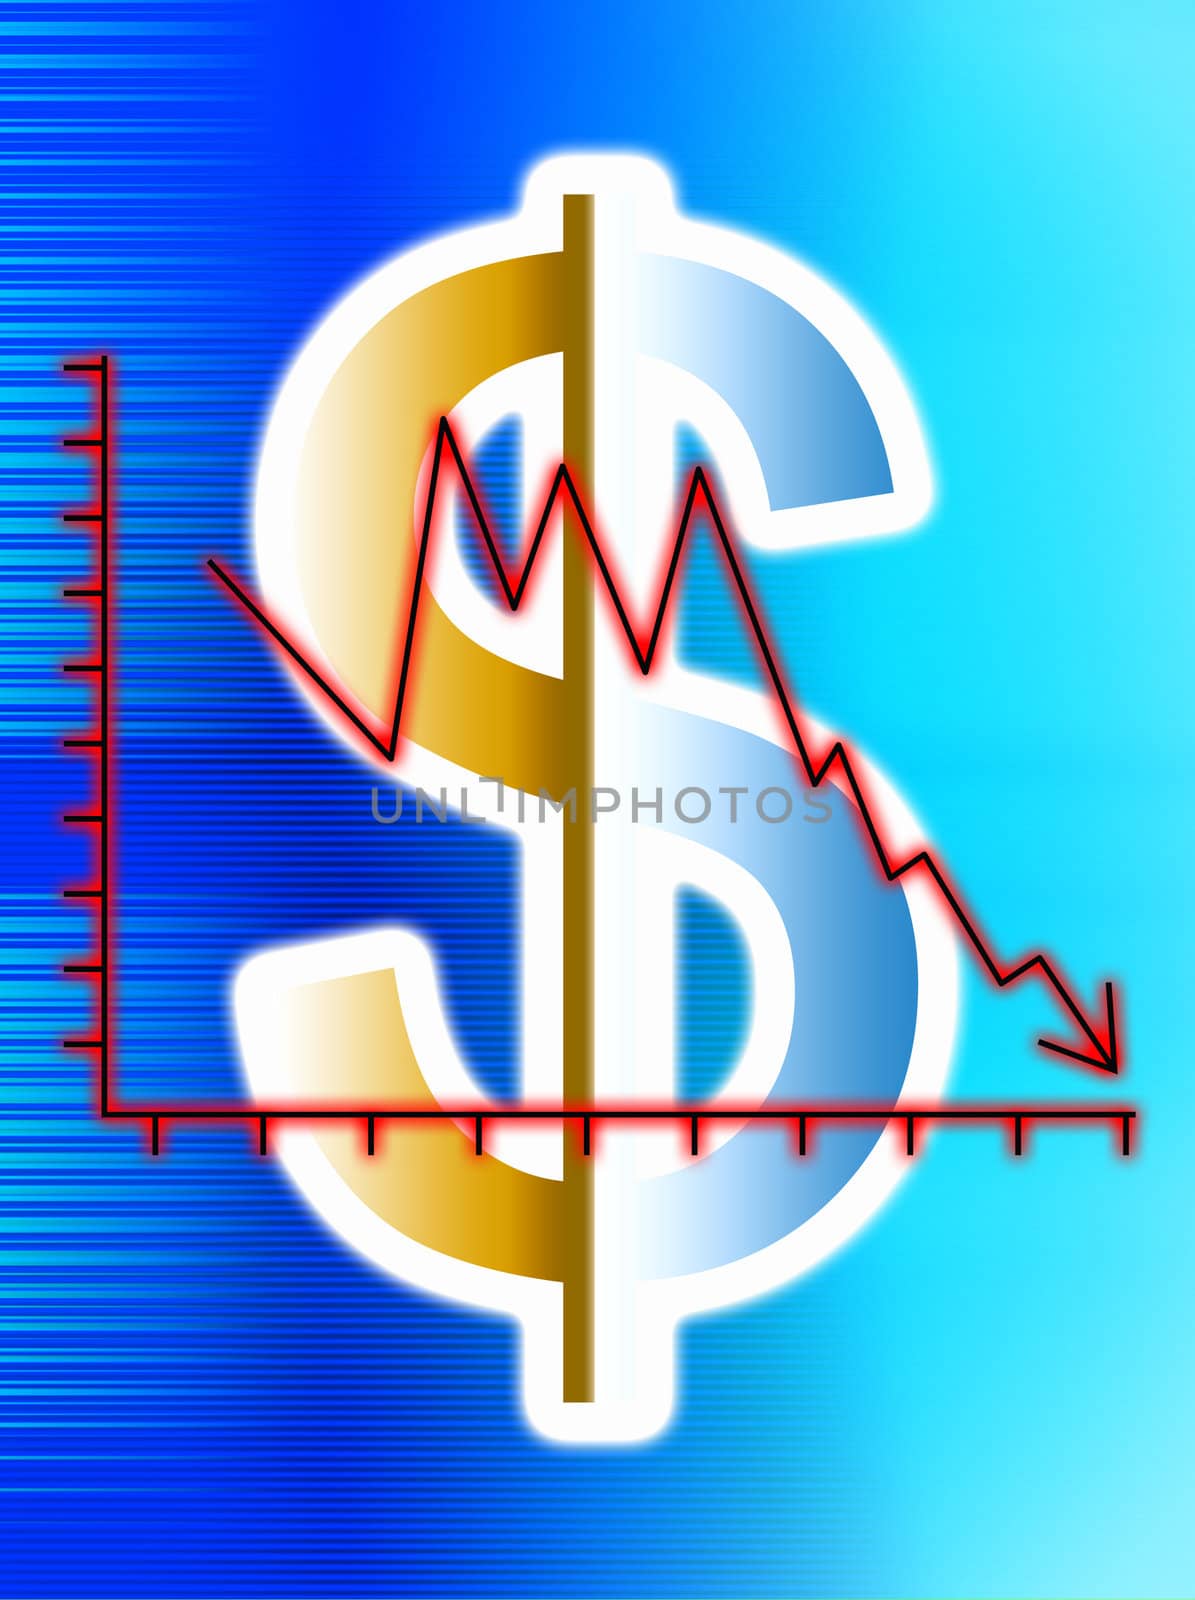 Concept image about the crises in the US dollar.